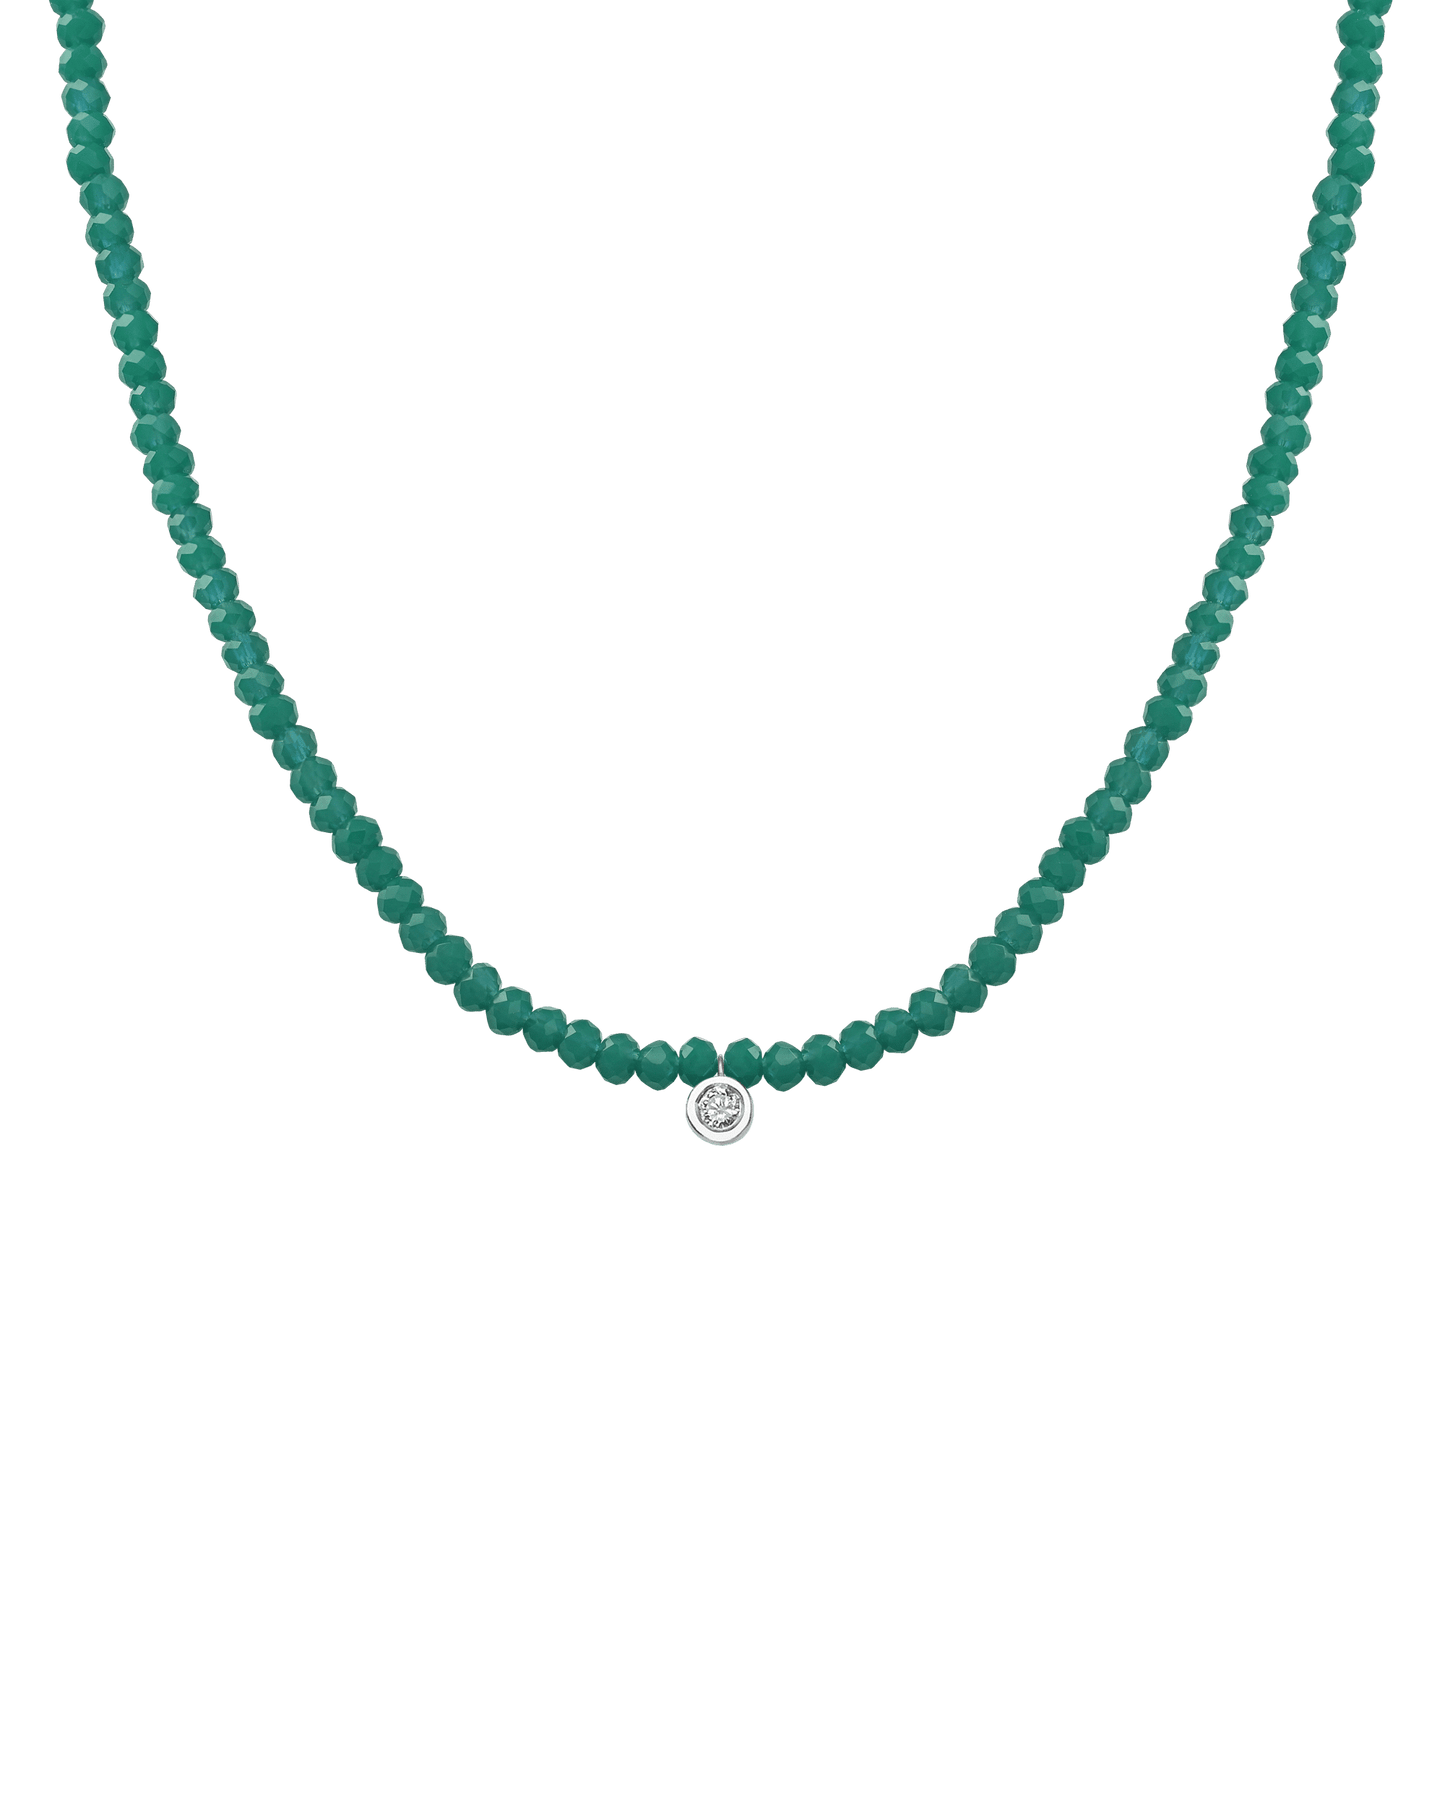 The Gemstone & Diamond Necklace - 14K White Gold Necklaces 14K Solid Gold Natural Emerald Medium: 0.04ct 14"